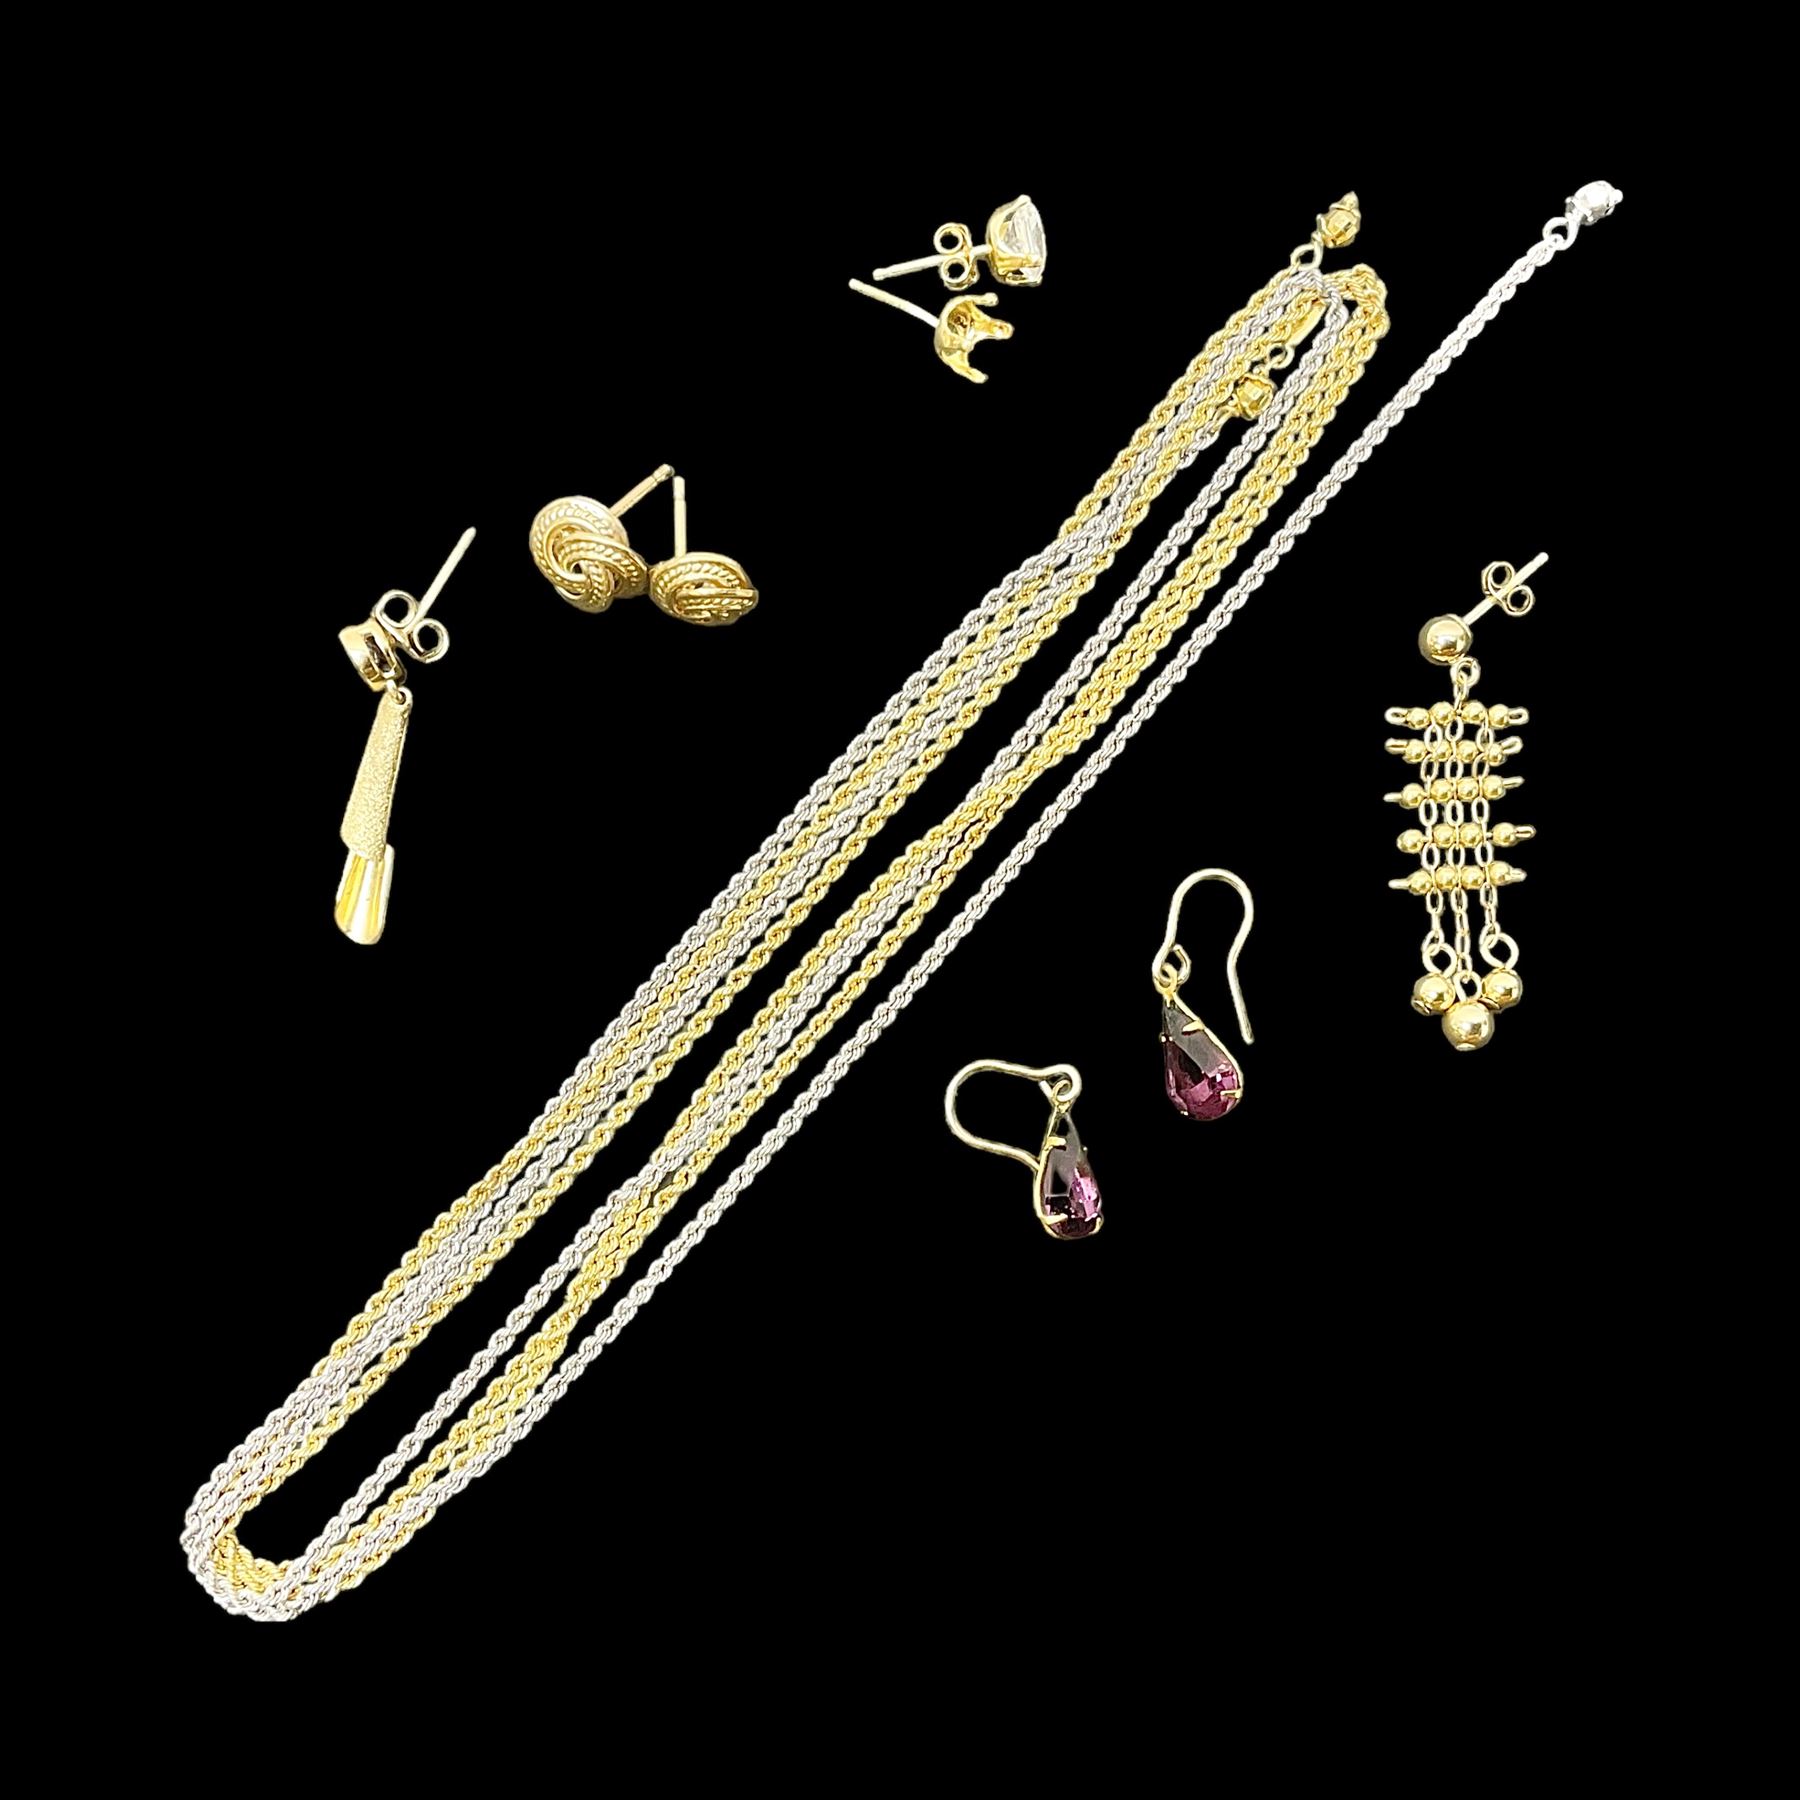 9ct gold jewellery including chains and earrings